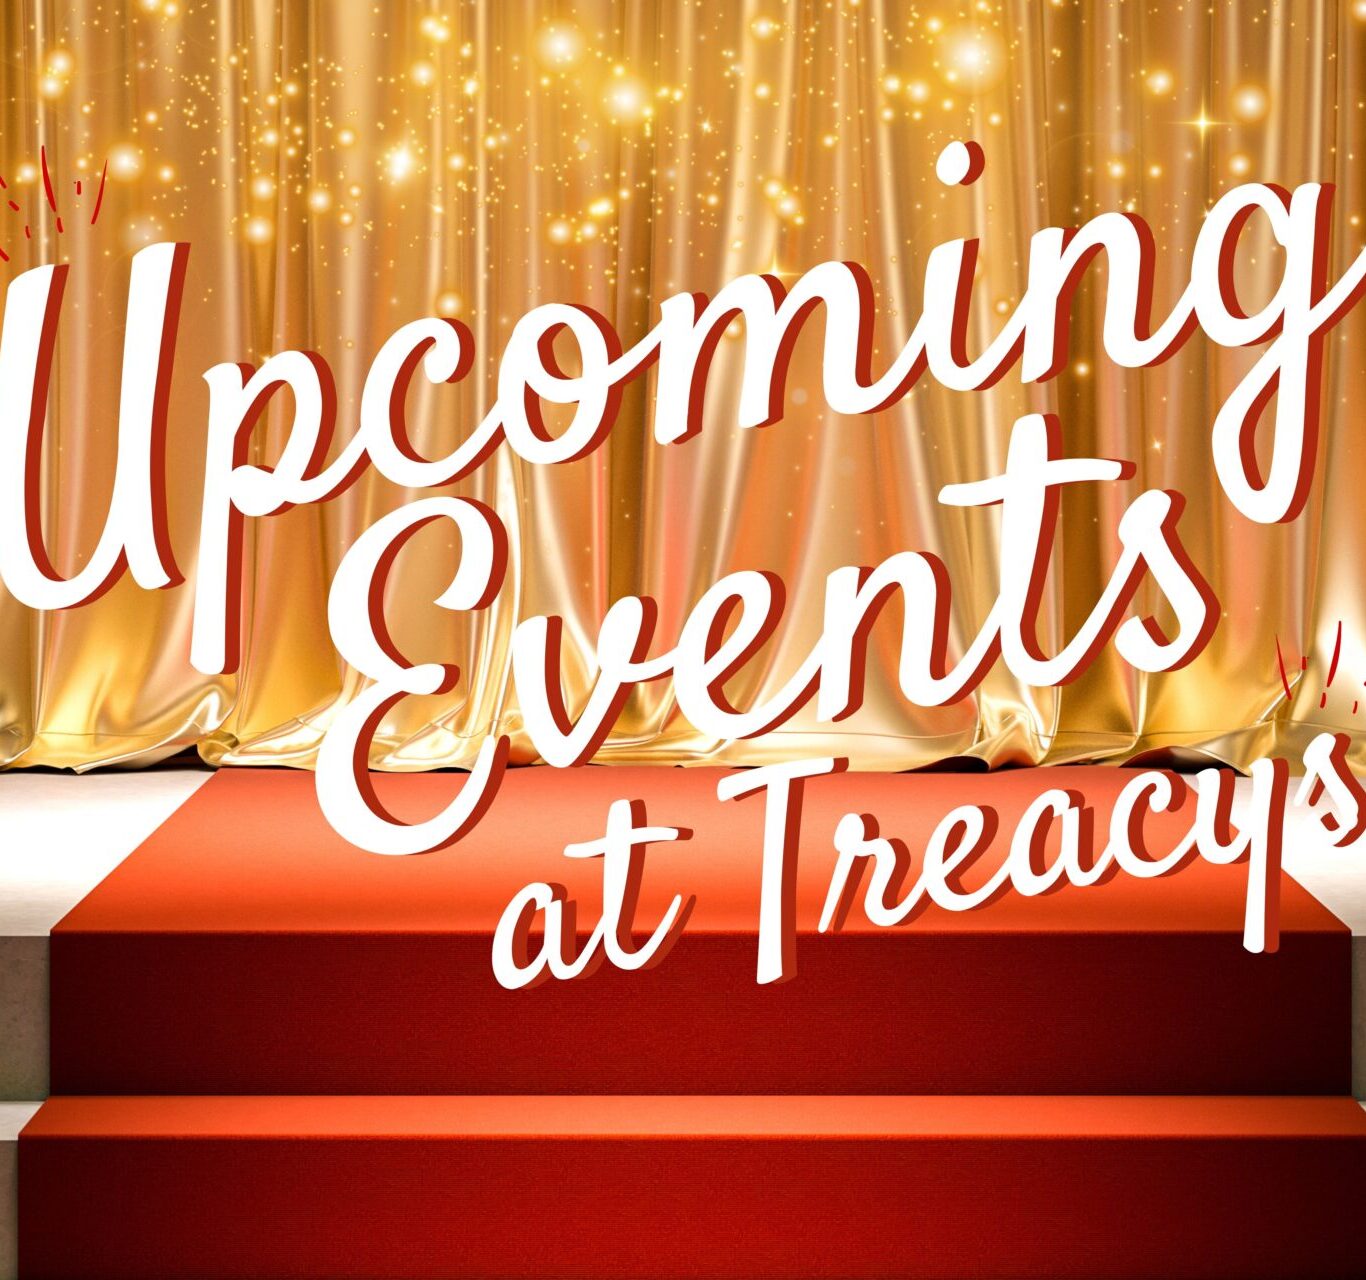 Upcoming Events Website Banner